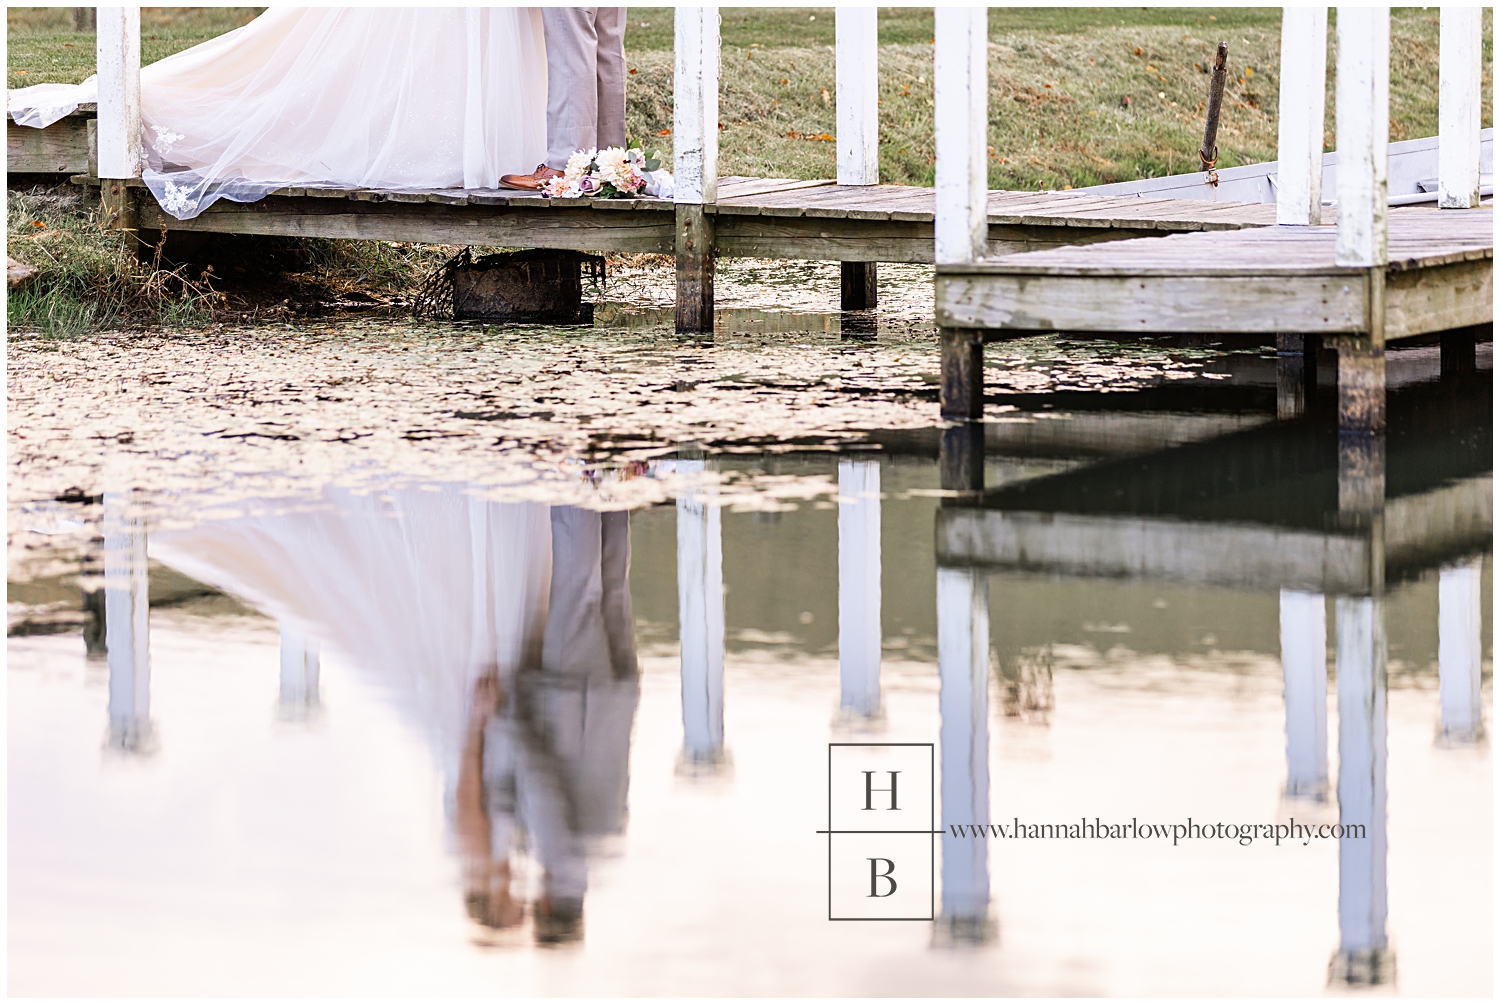 Bride and groom reflection in lake is shown.